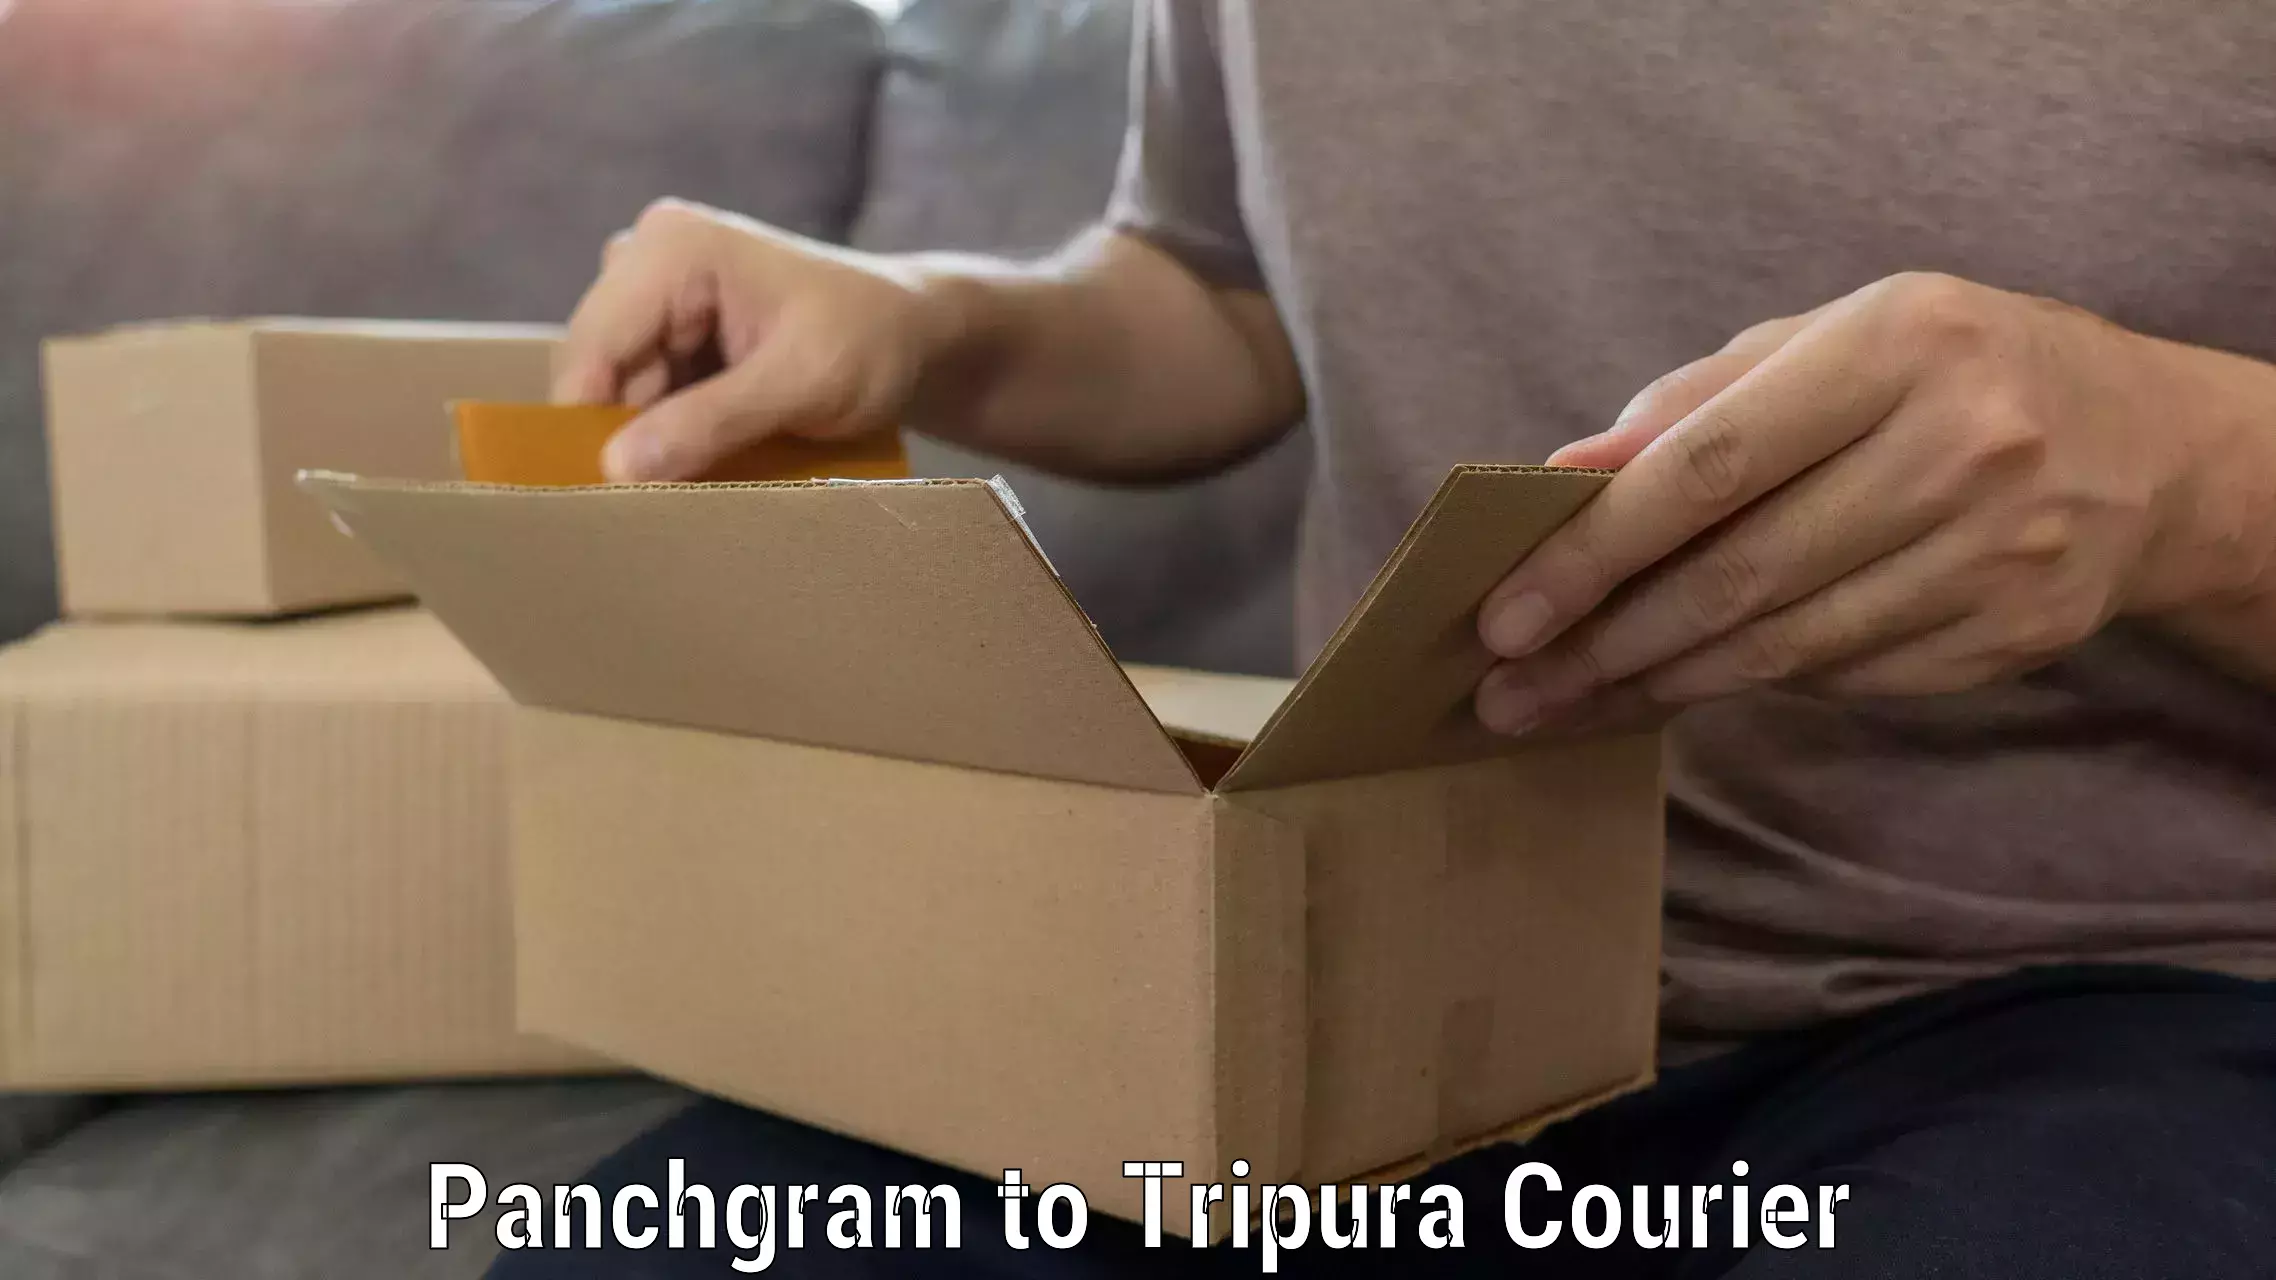 Furniture transport specialists Panchgram to Tripura